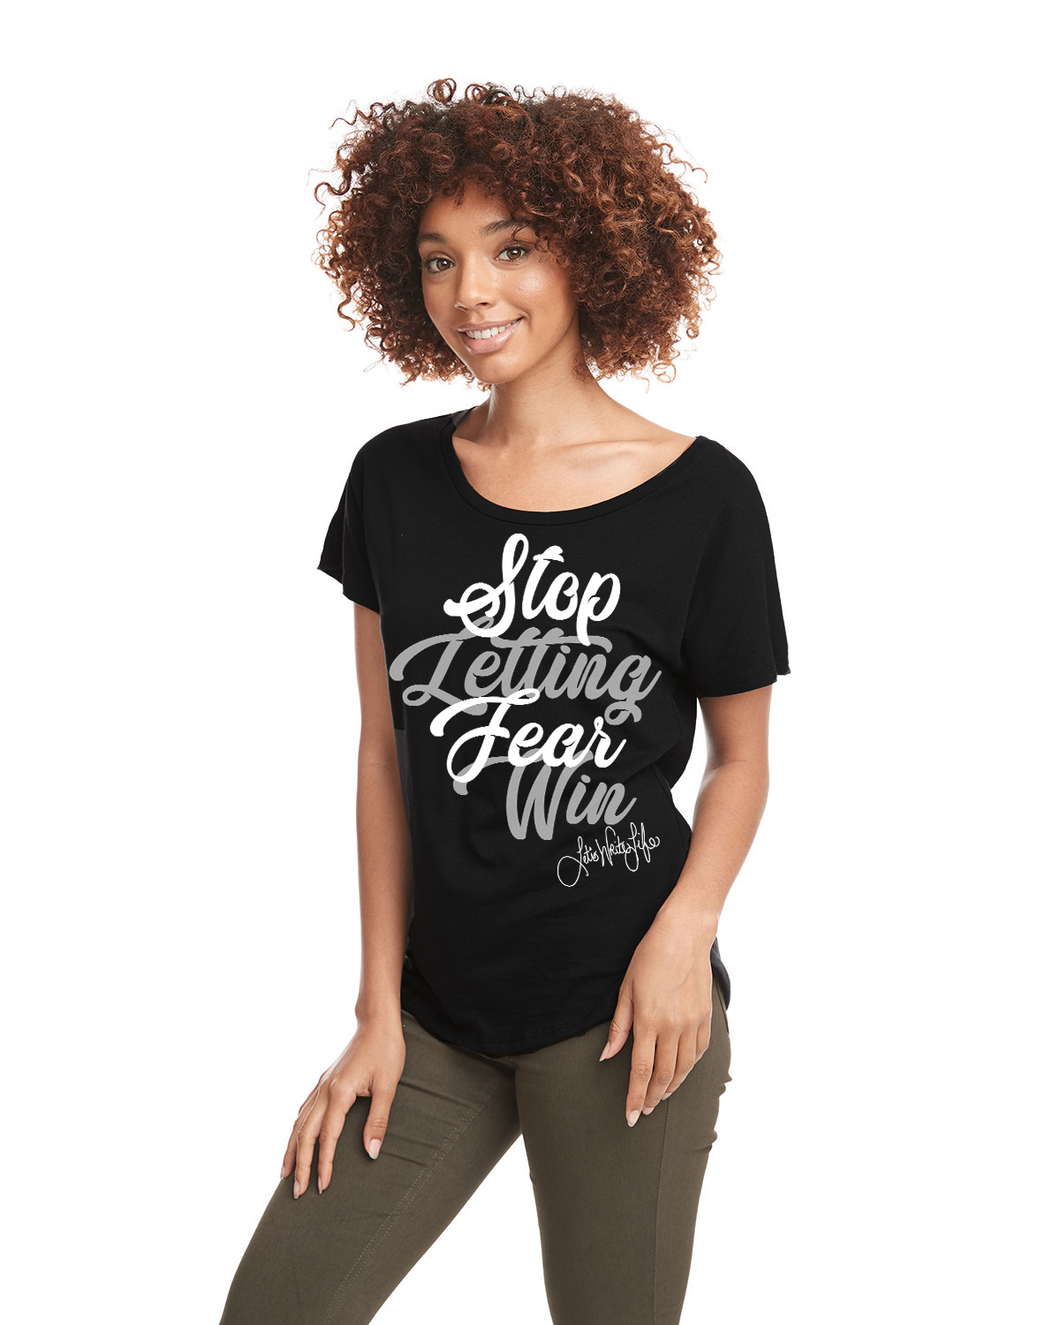 Stop Letting Fear Win (Black Relaxed T-shirt)